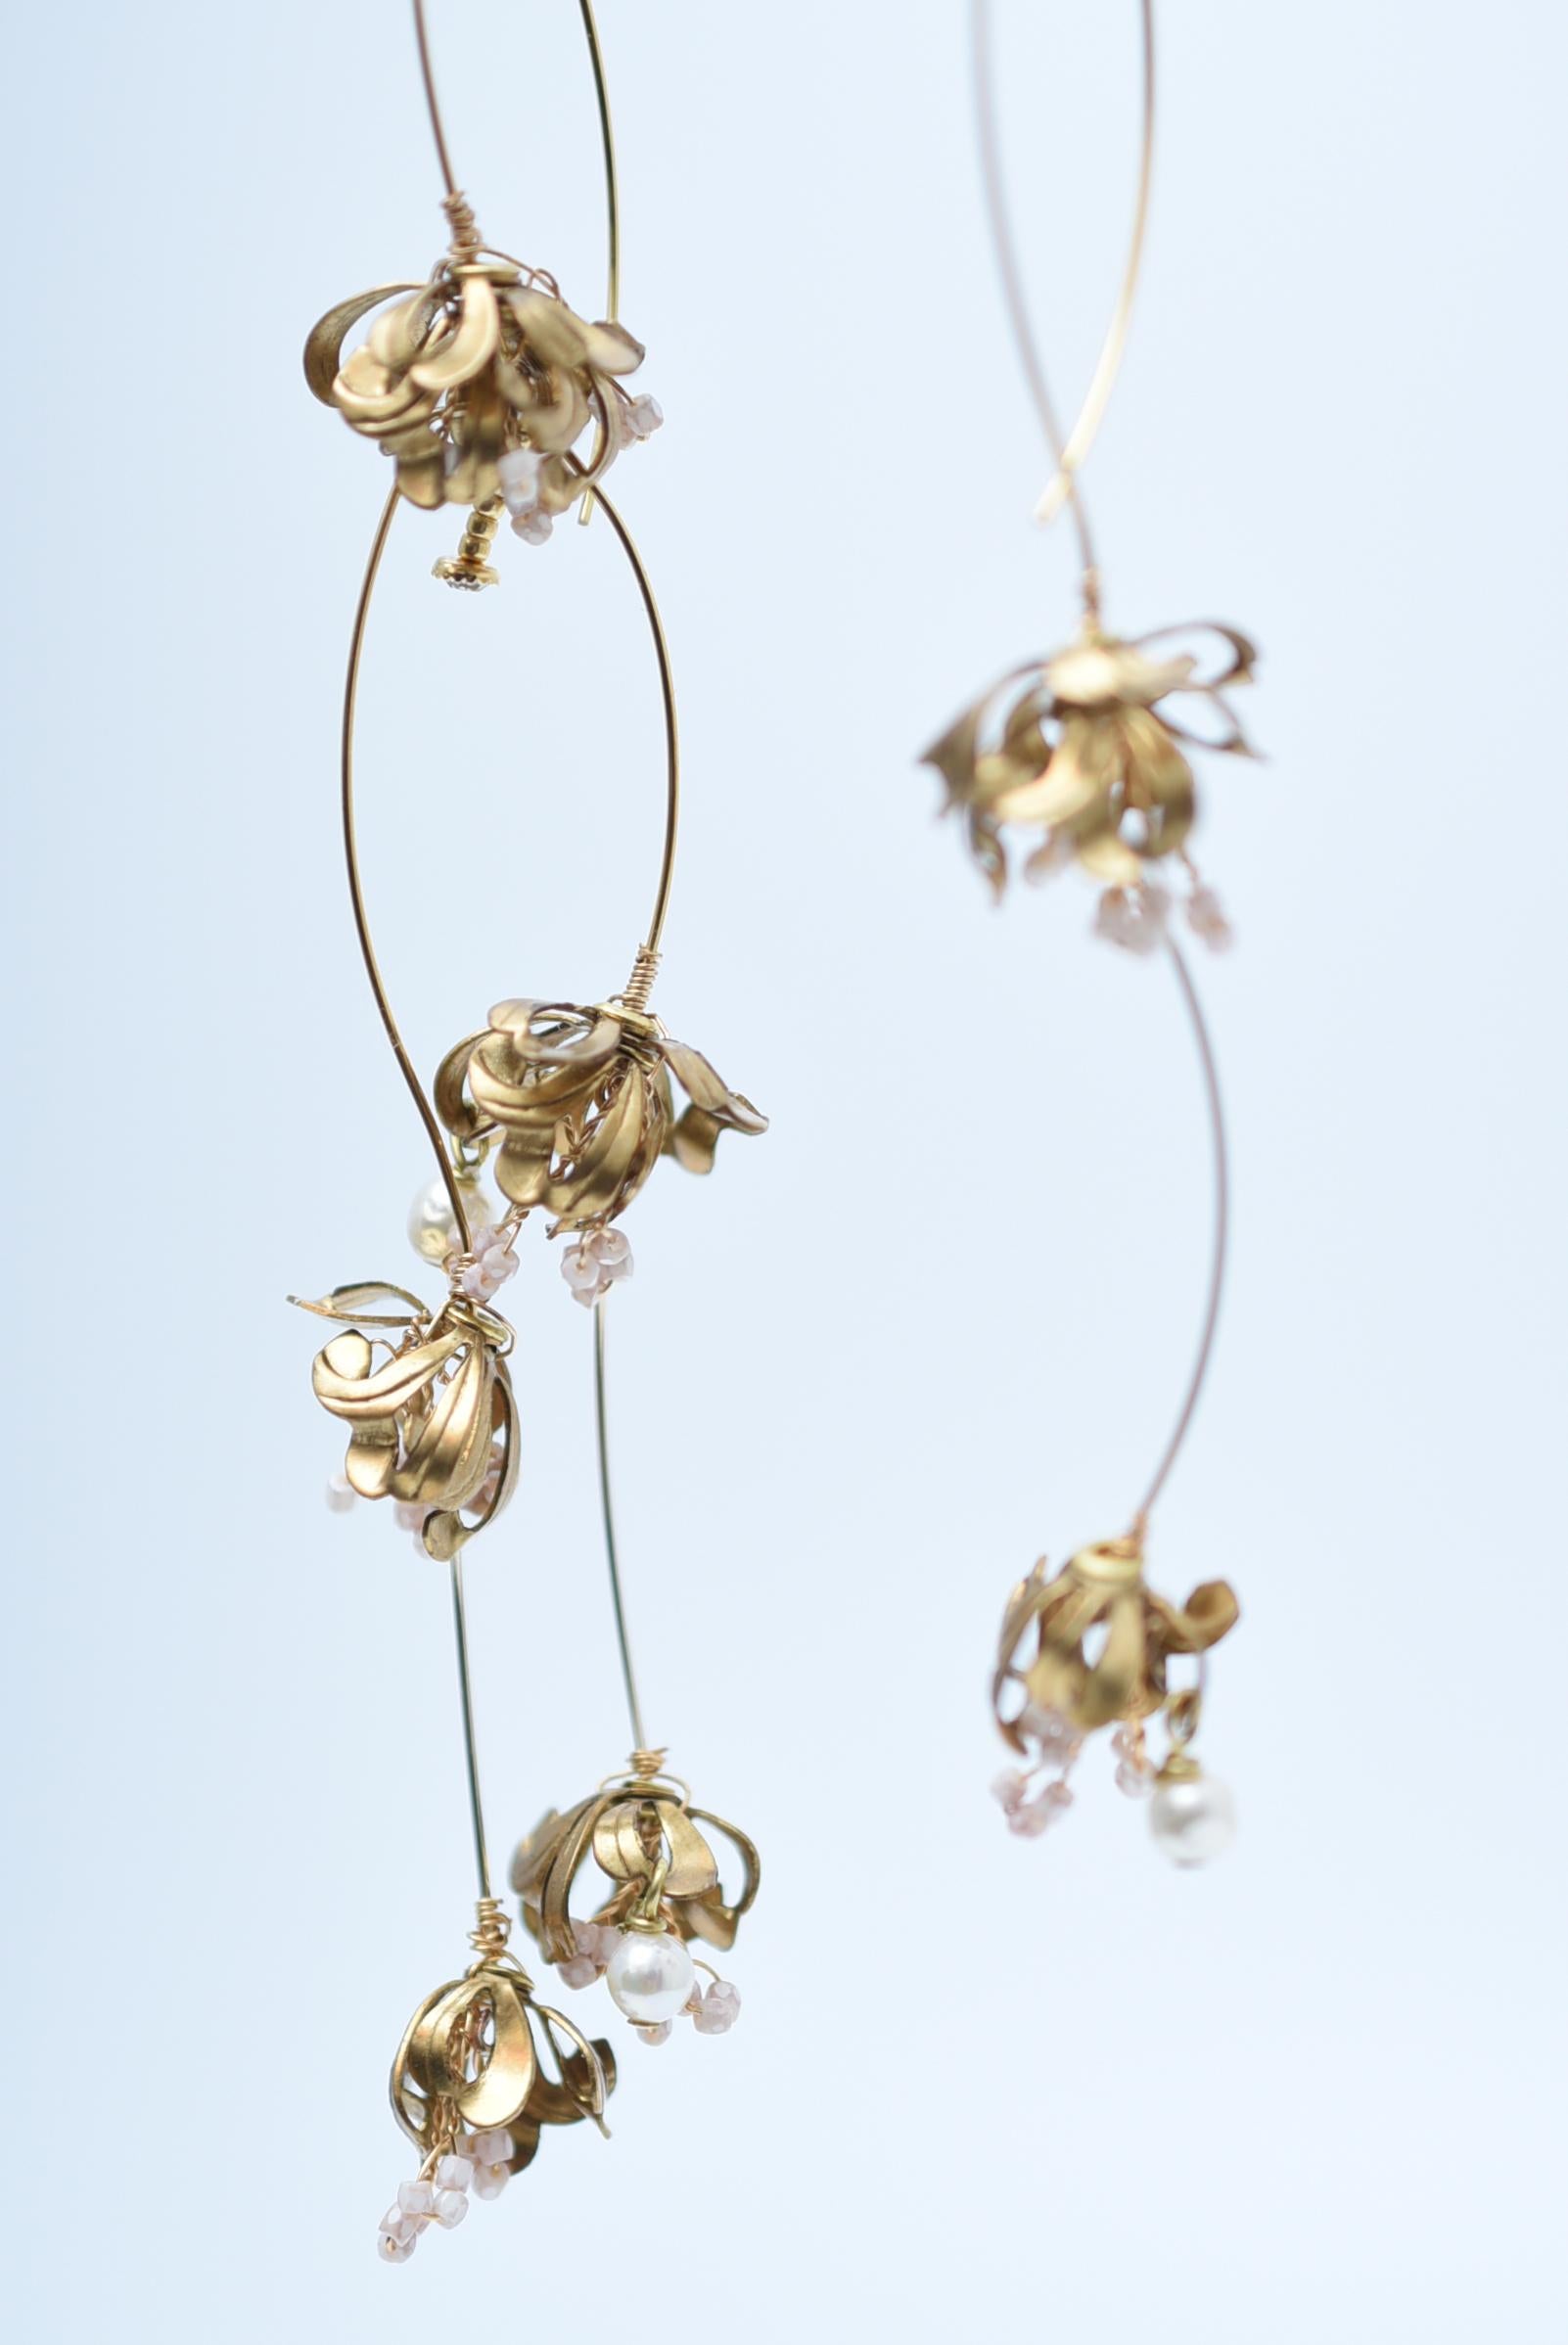 material:Brass, Vintage 1970s Japanese glass pearls,swarovski,1970s vintage parts
size:length 13cm

These fashionable earrings have a generous length of 13 cm and asymmetry.
The mobiles sway around your face for special occasions, but also for